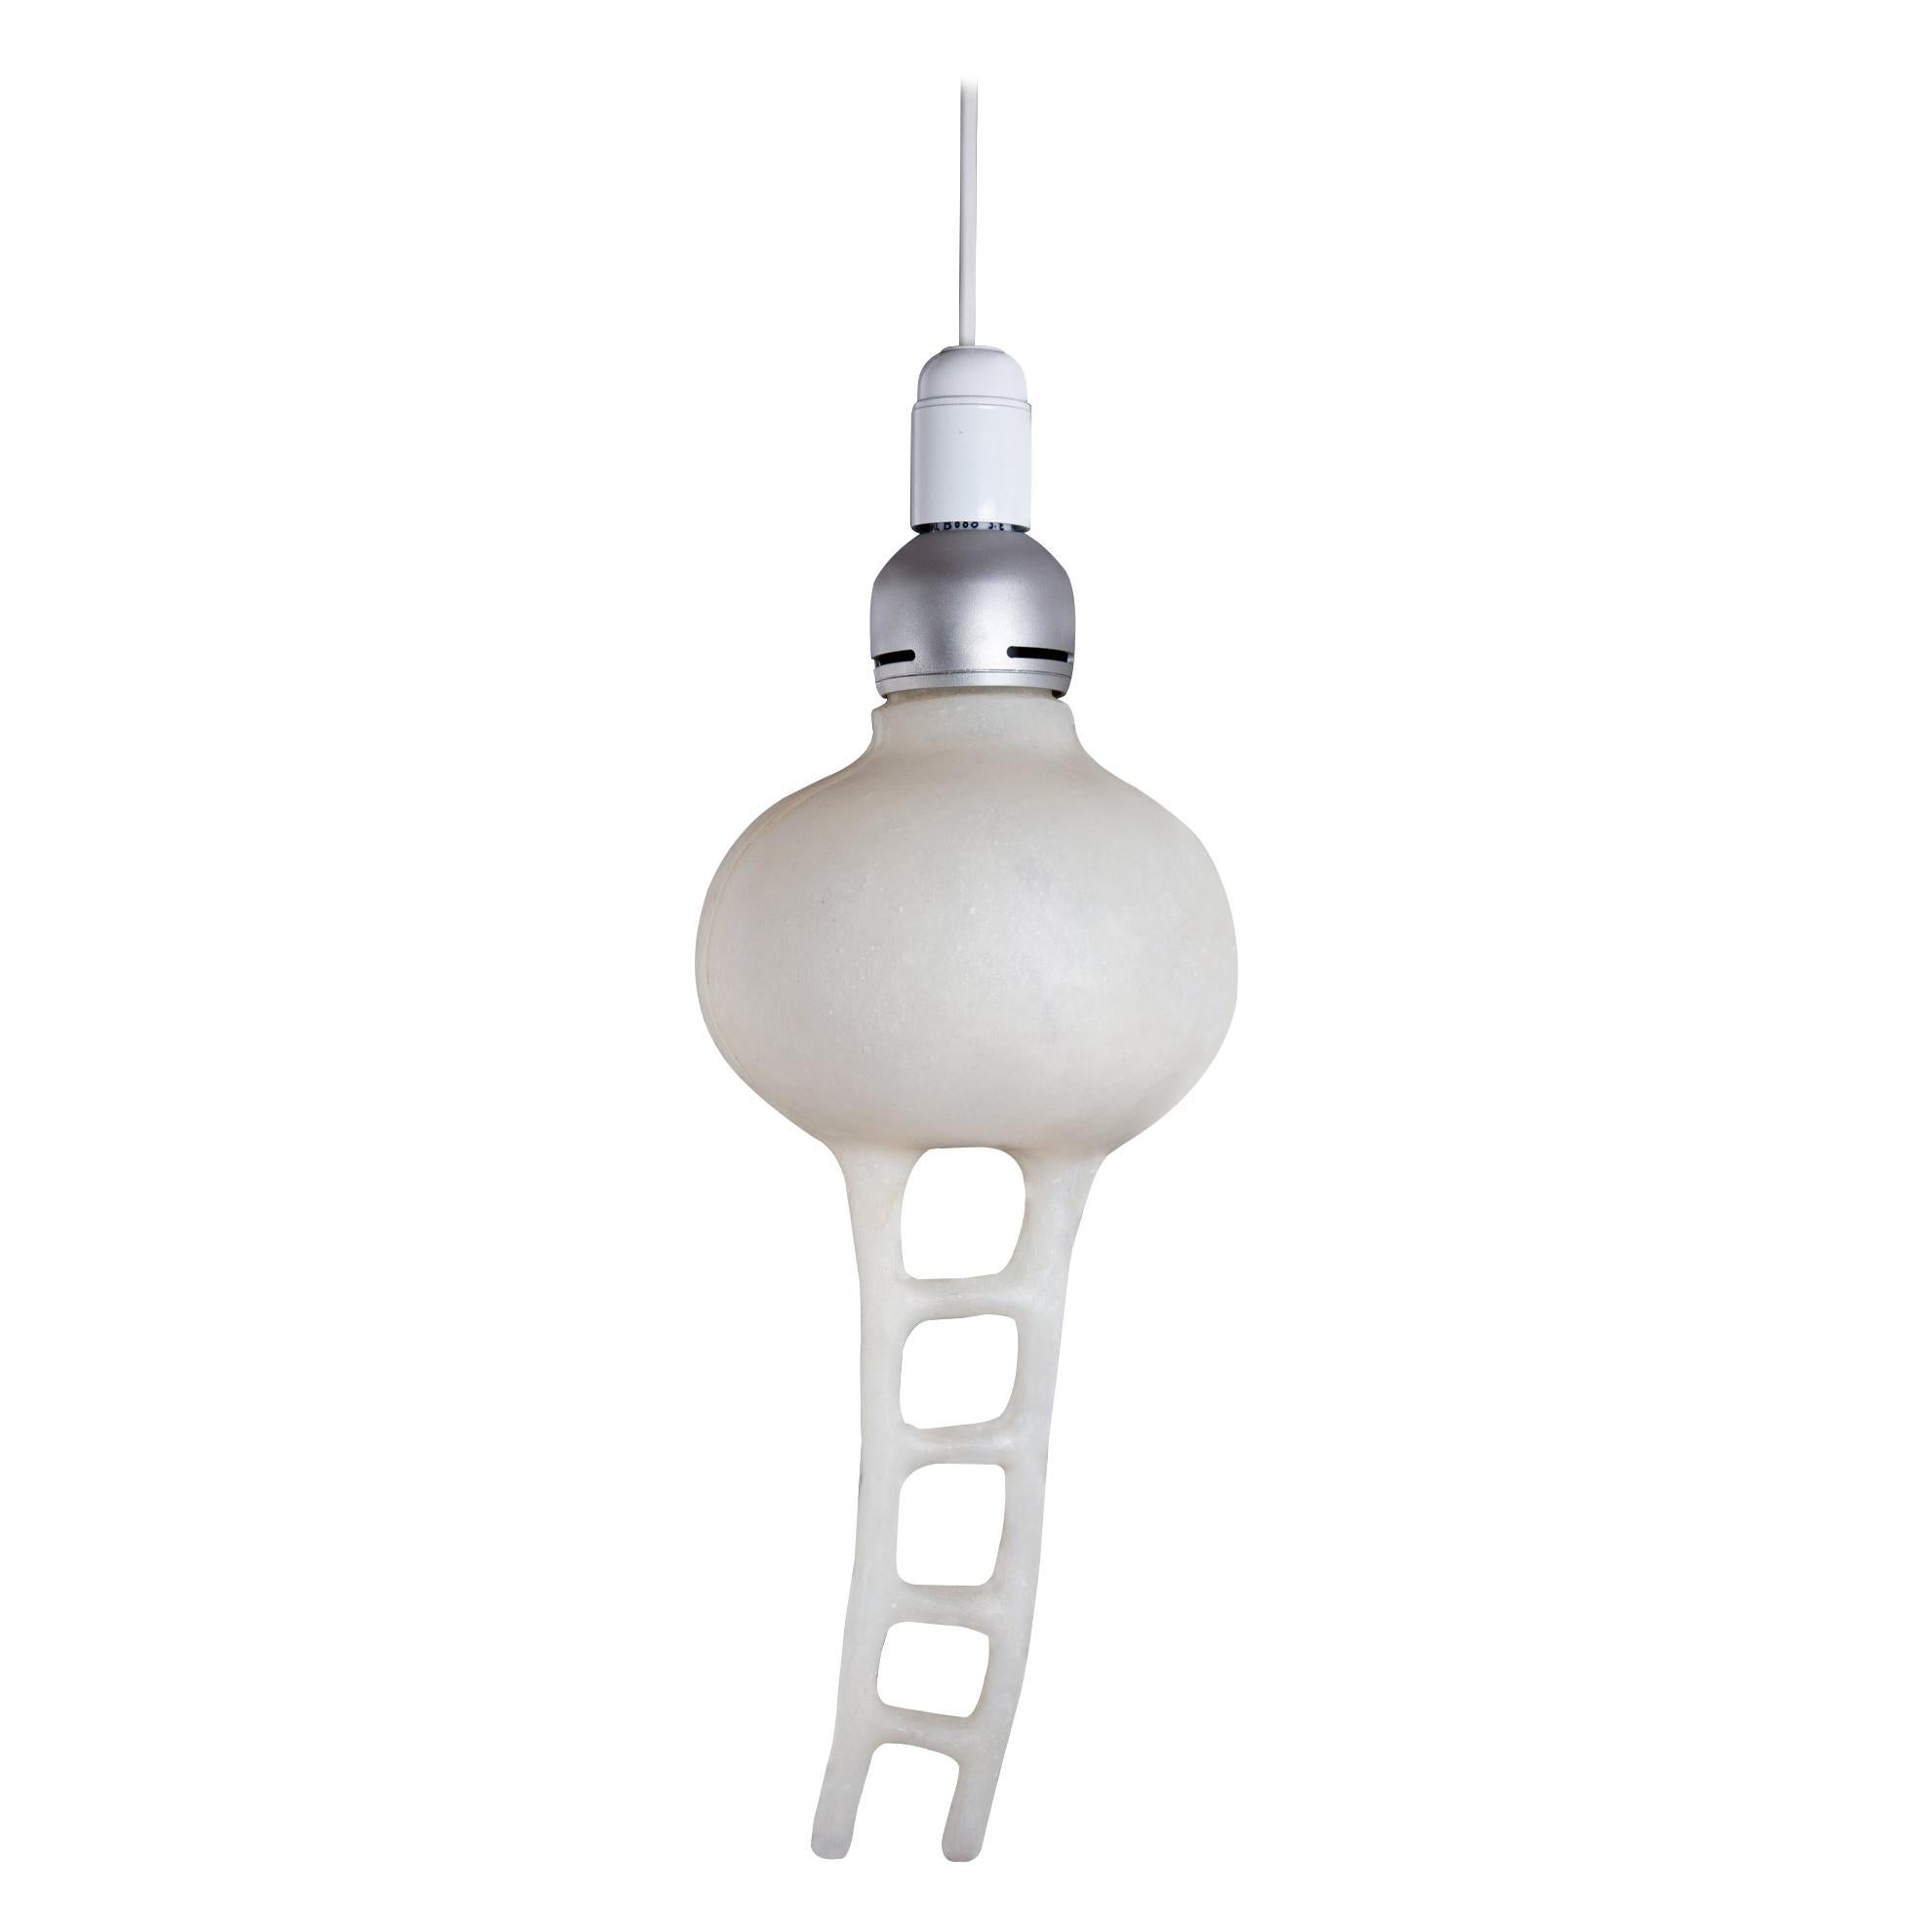 Nacho Carbonell Silicone Ladder Hanging Lamp Silicon Limited Edition For Sale